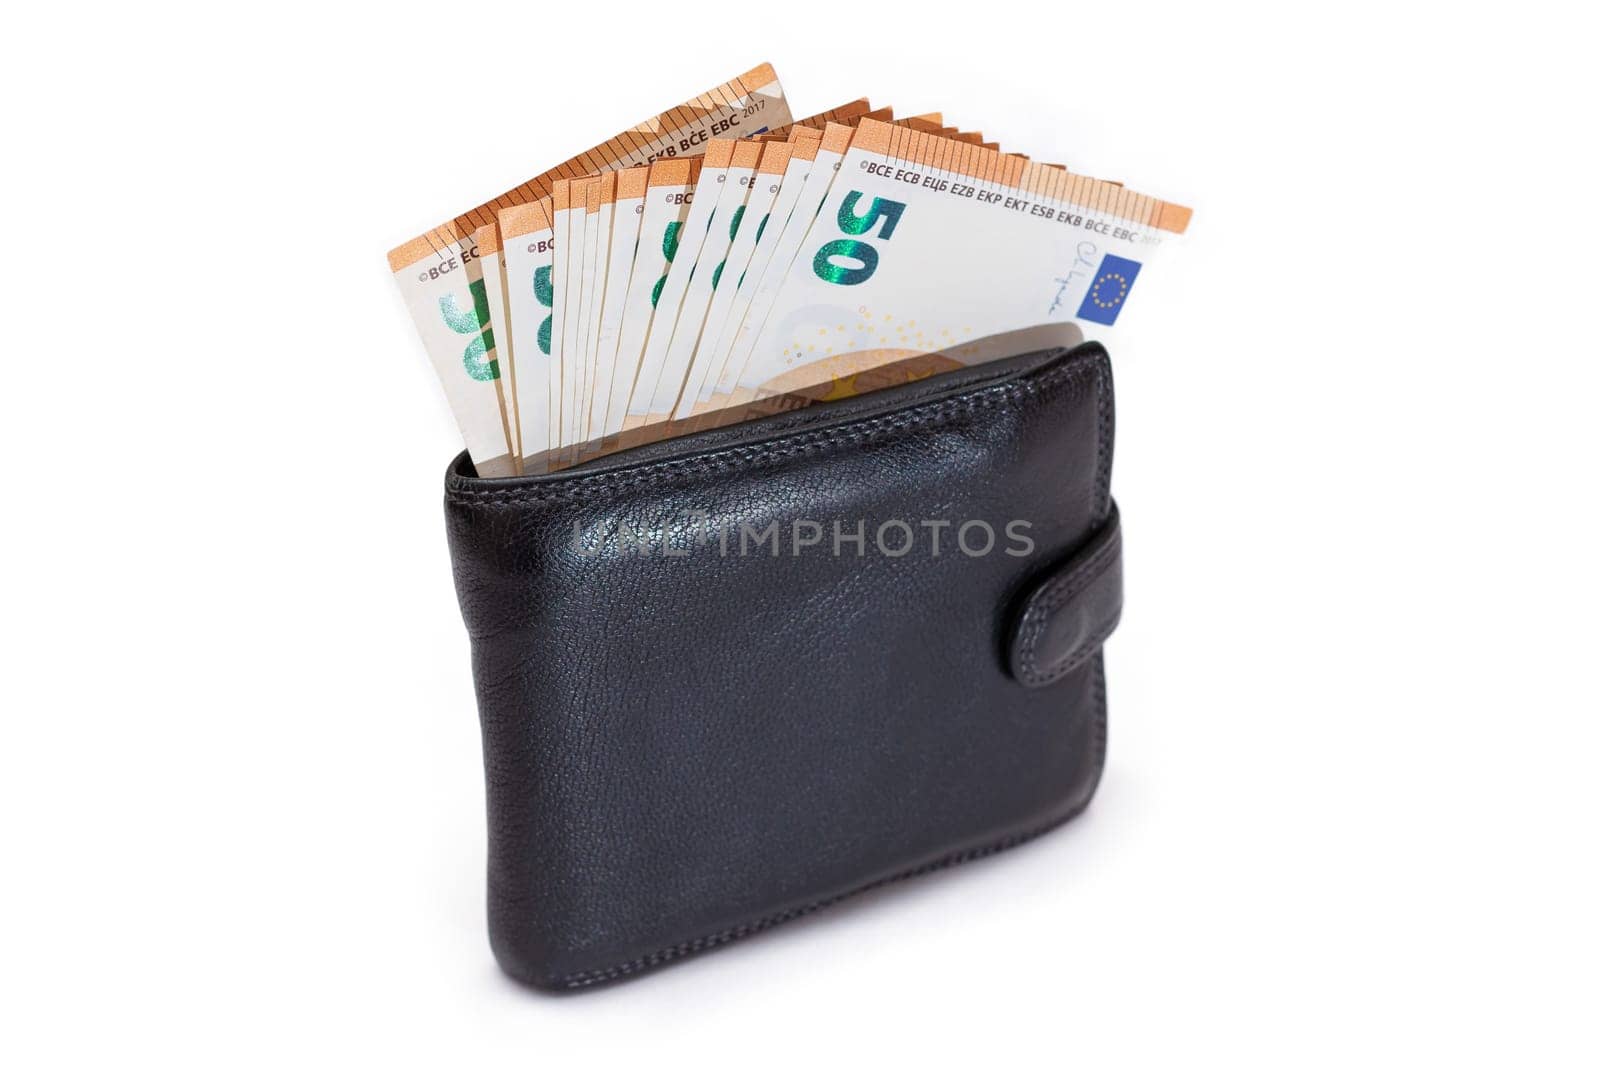 Black Leather Men Wallet with Fifty Euro Banknotes Inside - Isolated on White by InfinitumProdux